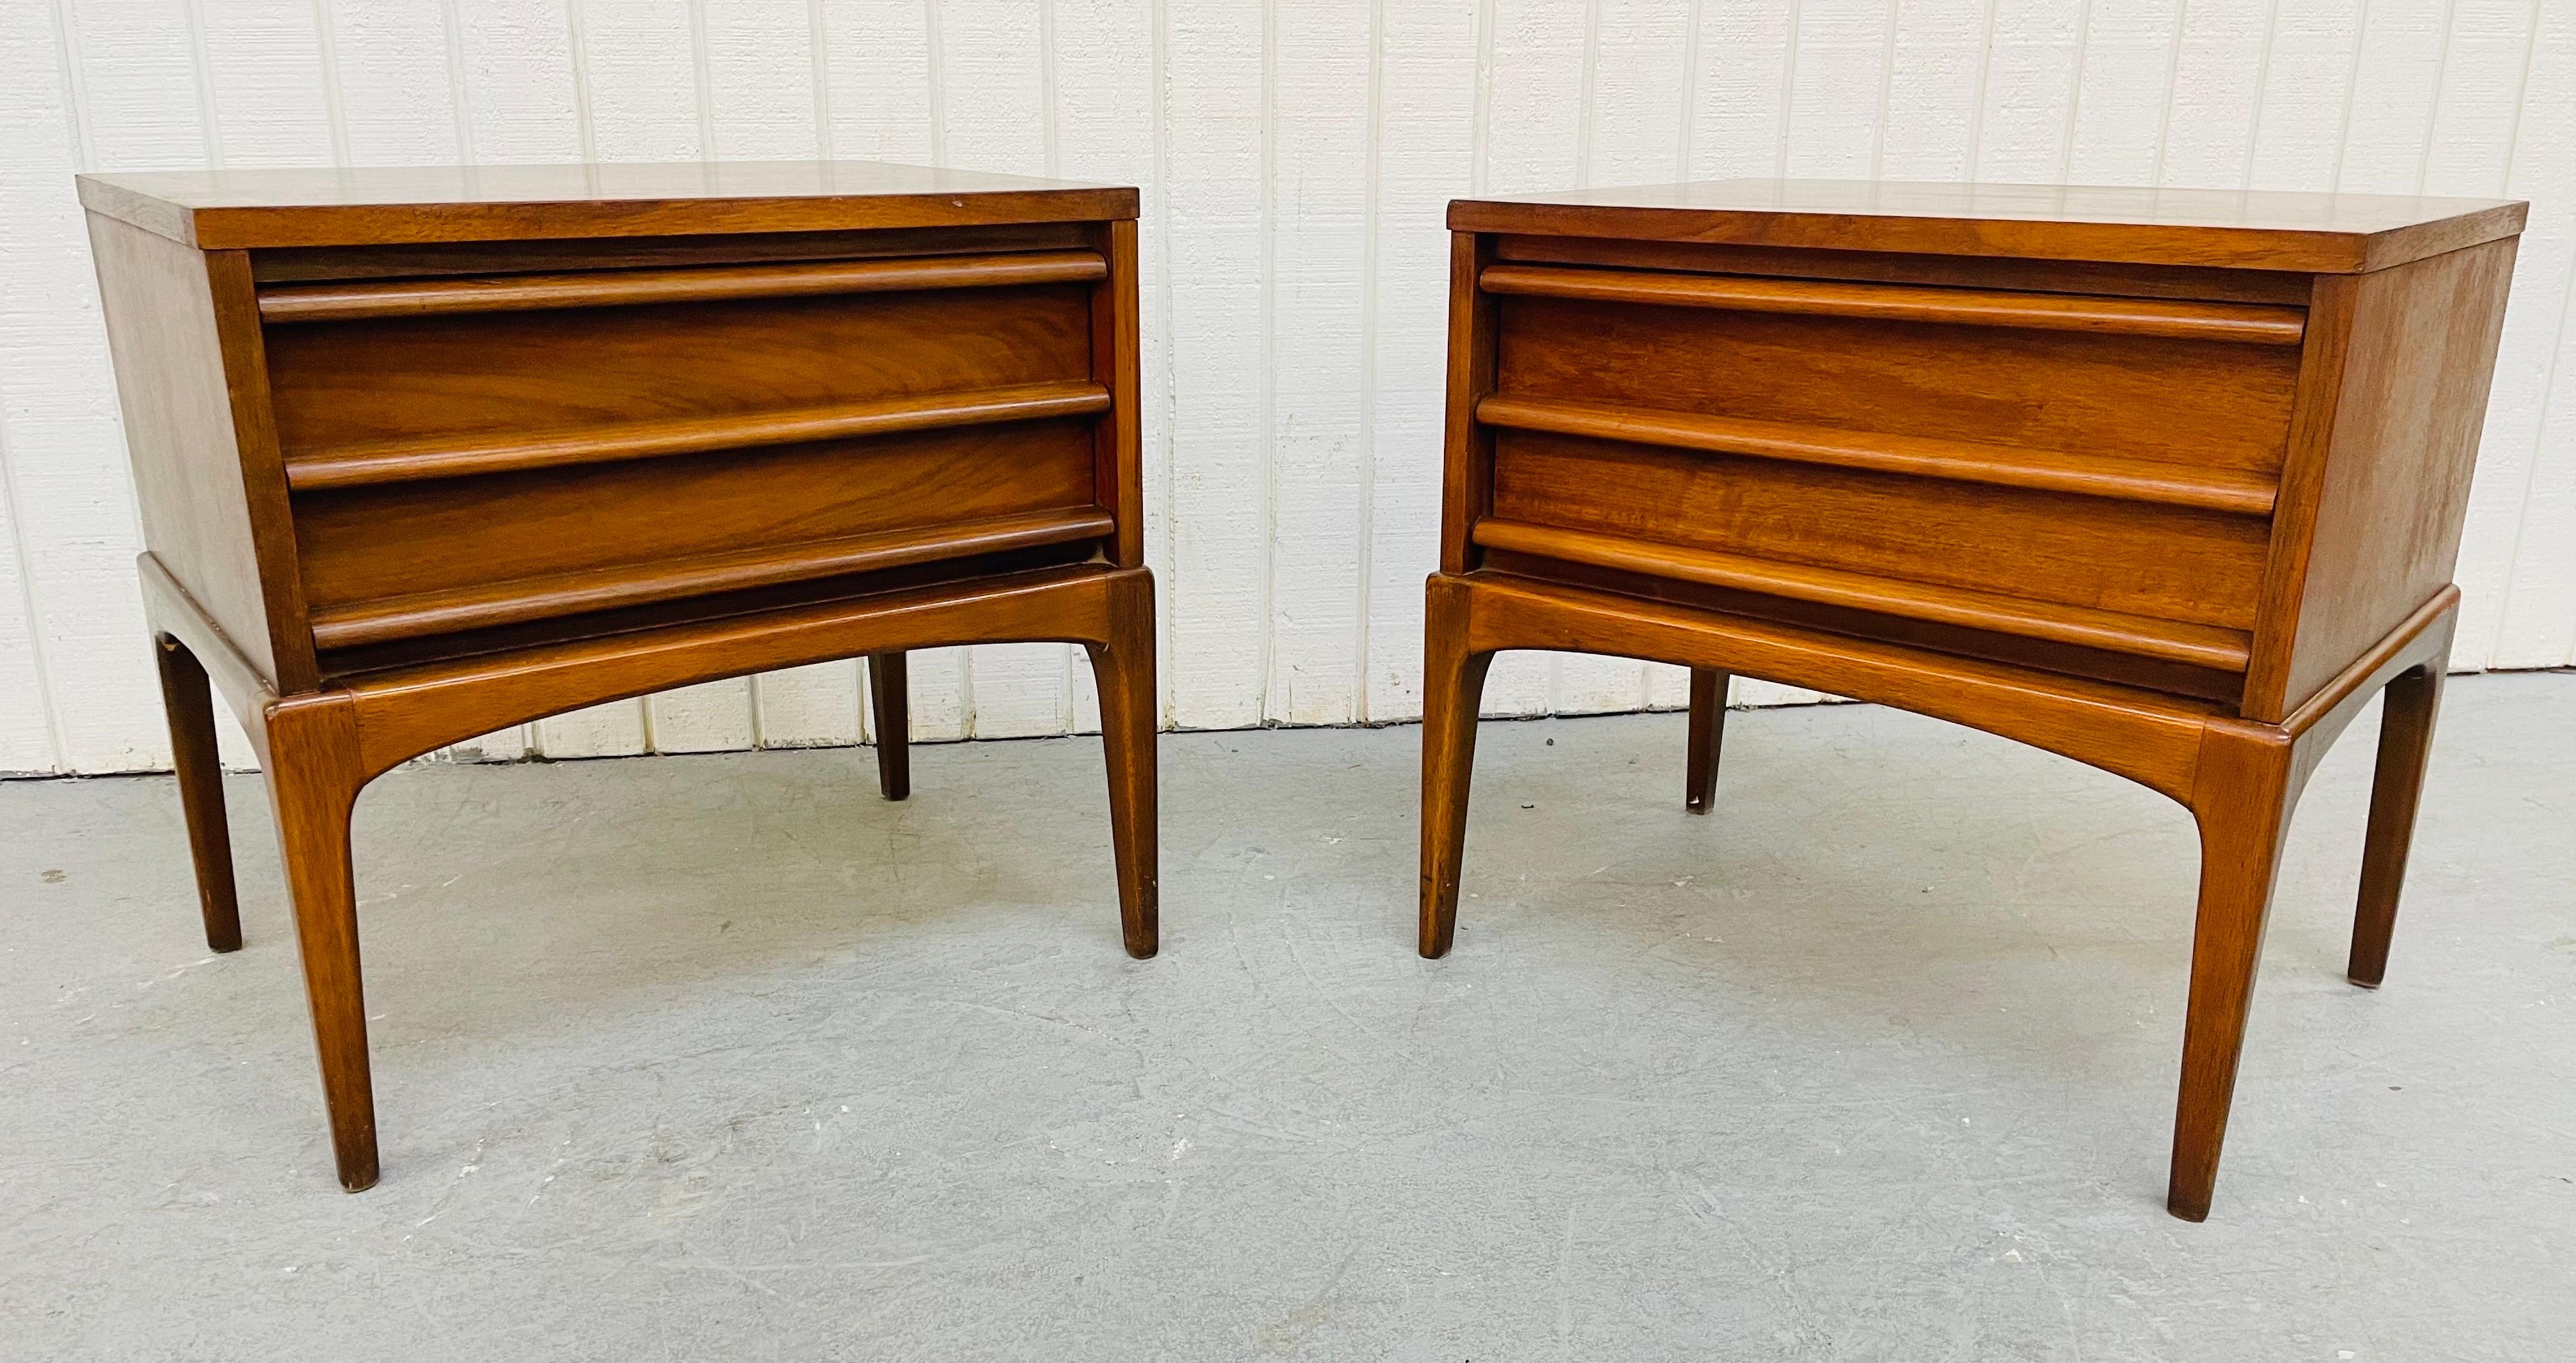 This listing is for a pair of mid-century Lane Rhythm walnut nightstands. Featuring a single drawer for storage, tall legs, and a beautiful walnut finish.